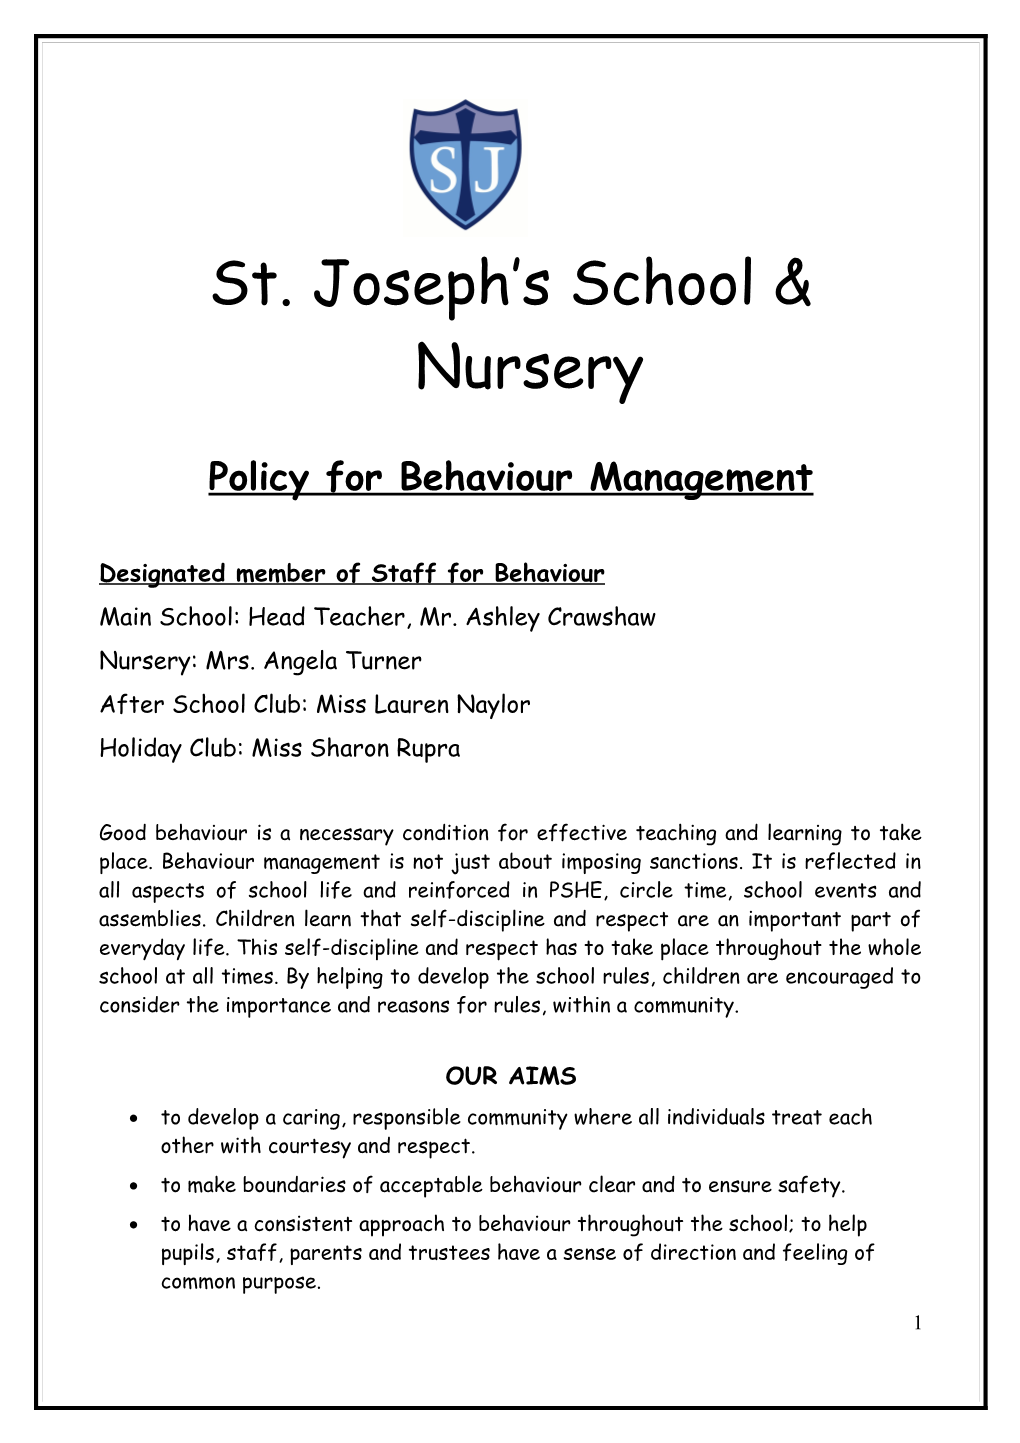 Policy for Behaviour Management